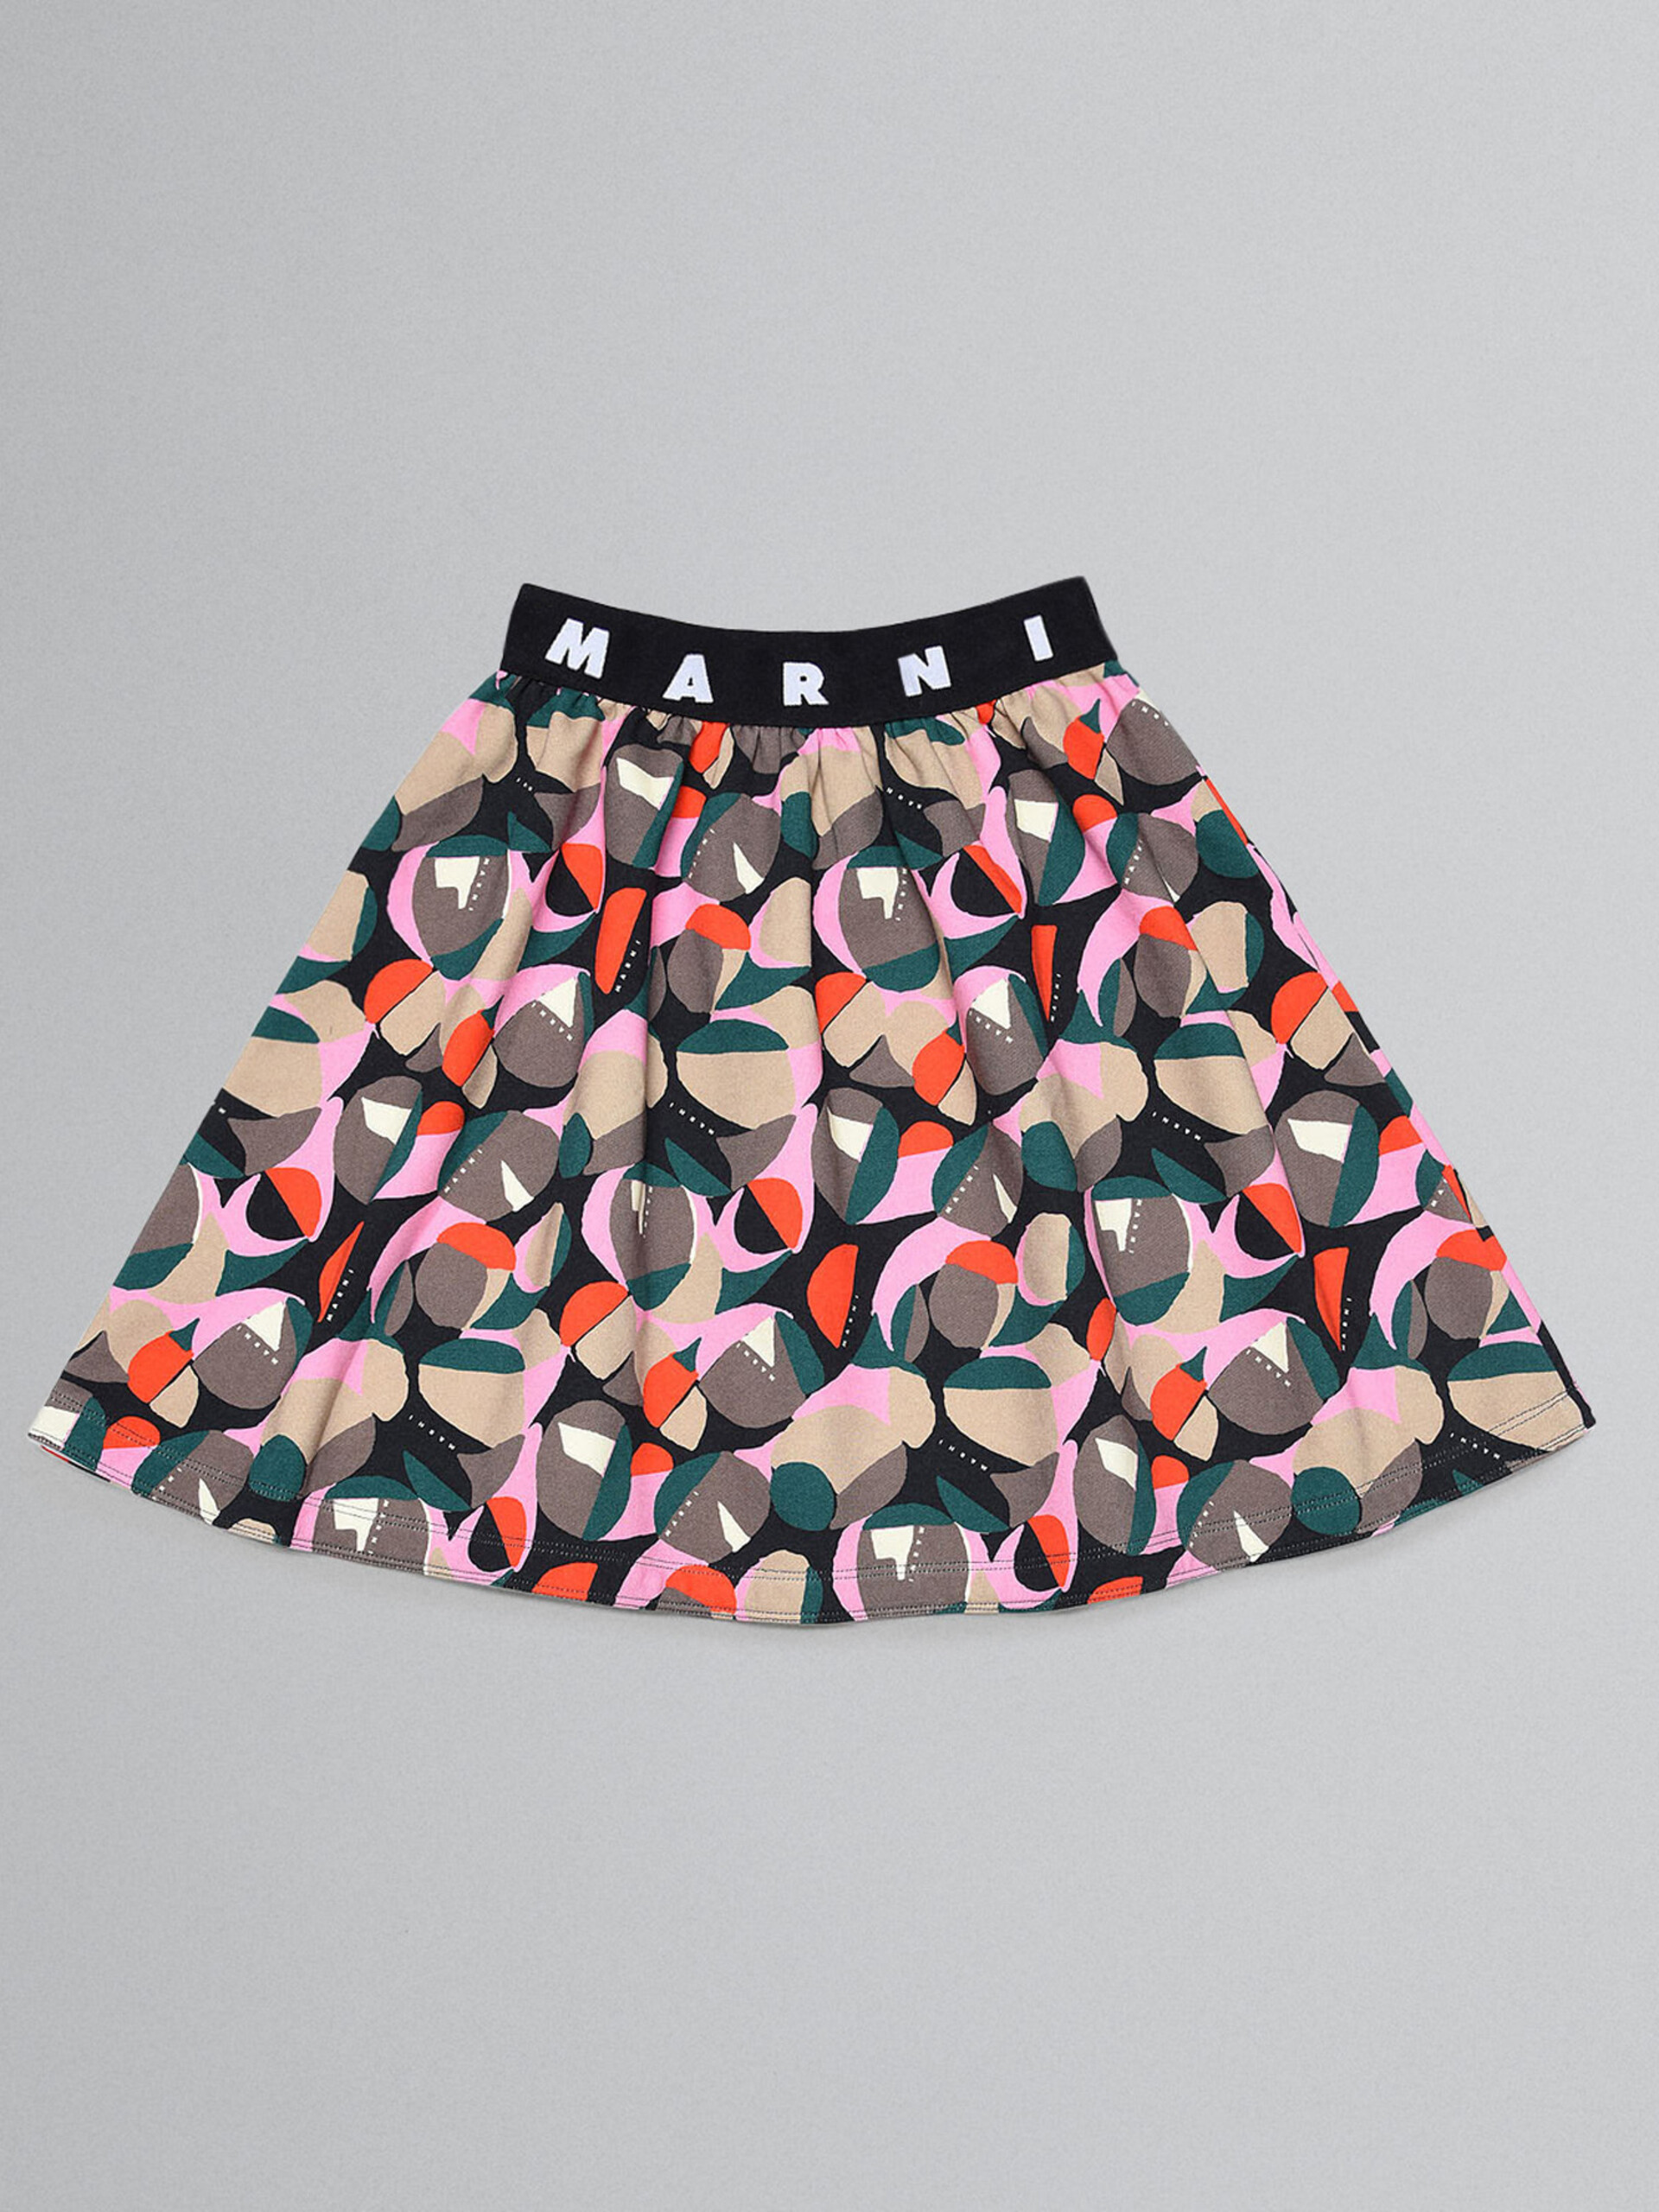 Black French terry skirt with Abstract print - Skirts - Image 1